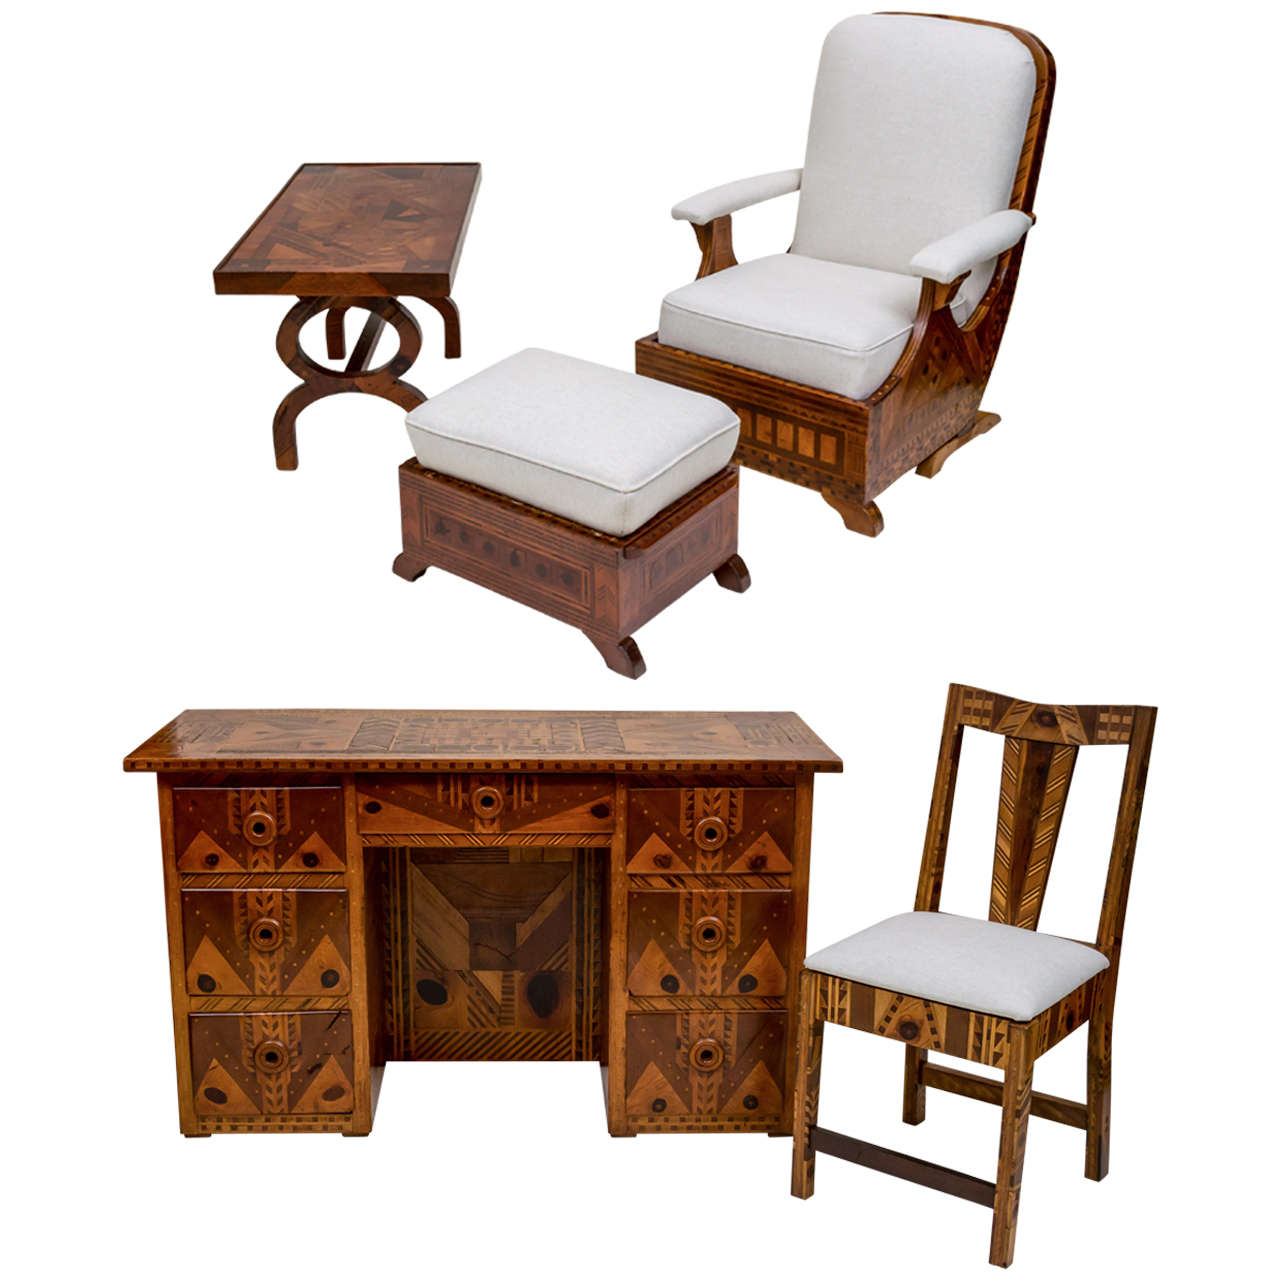 American Folk Art Marquetry Furniture, Suite of Five Pieces For Sale